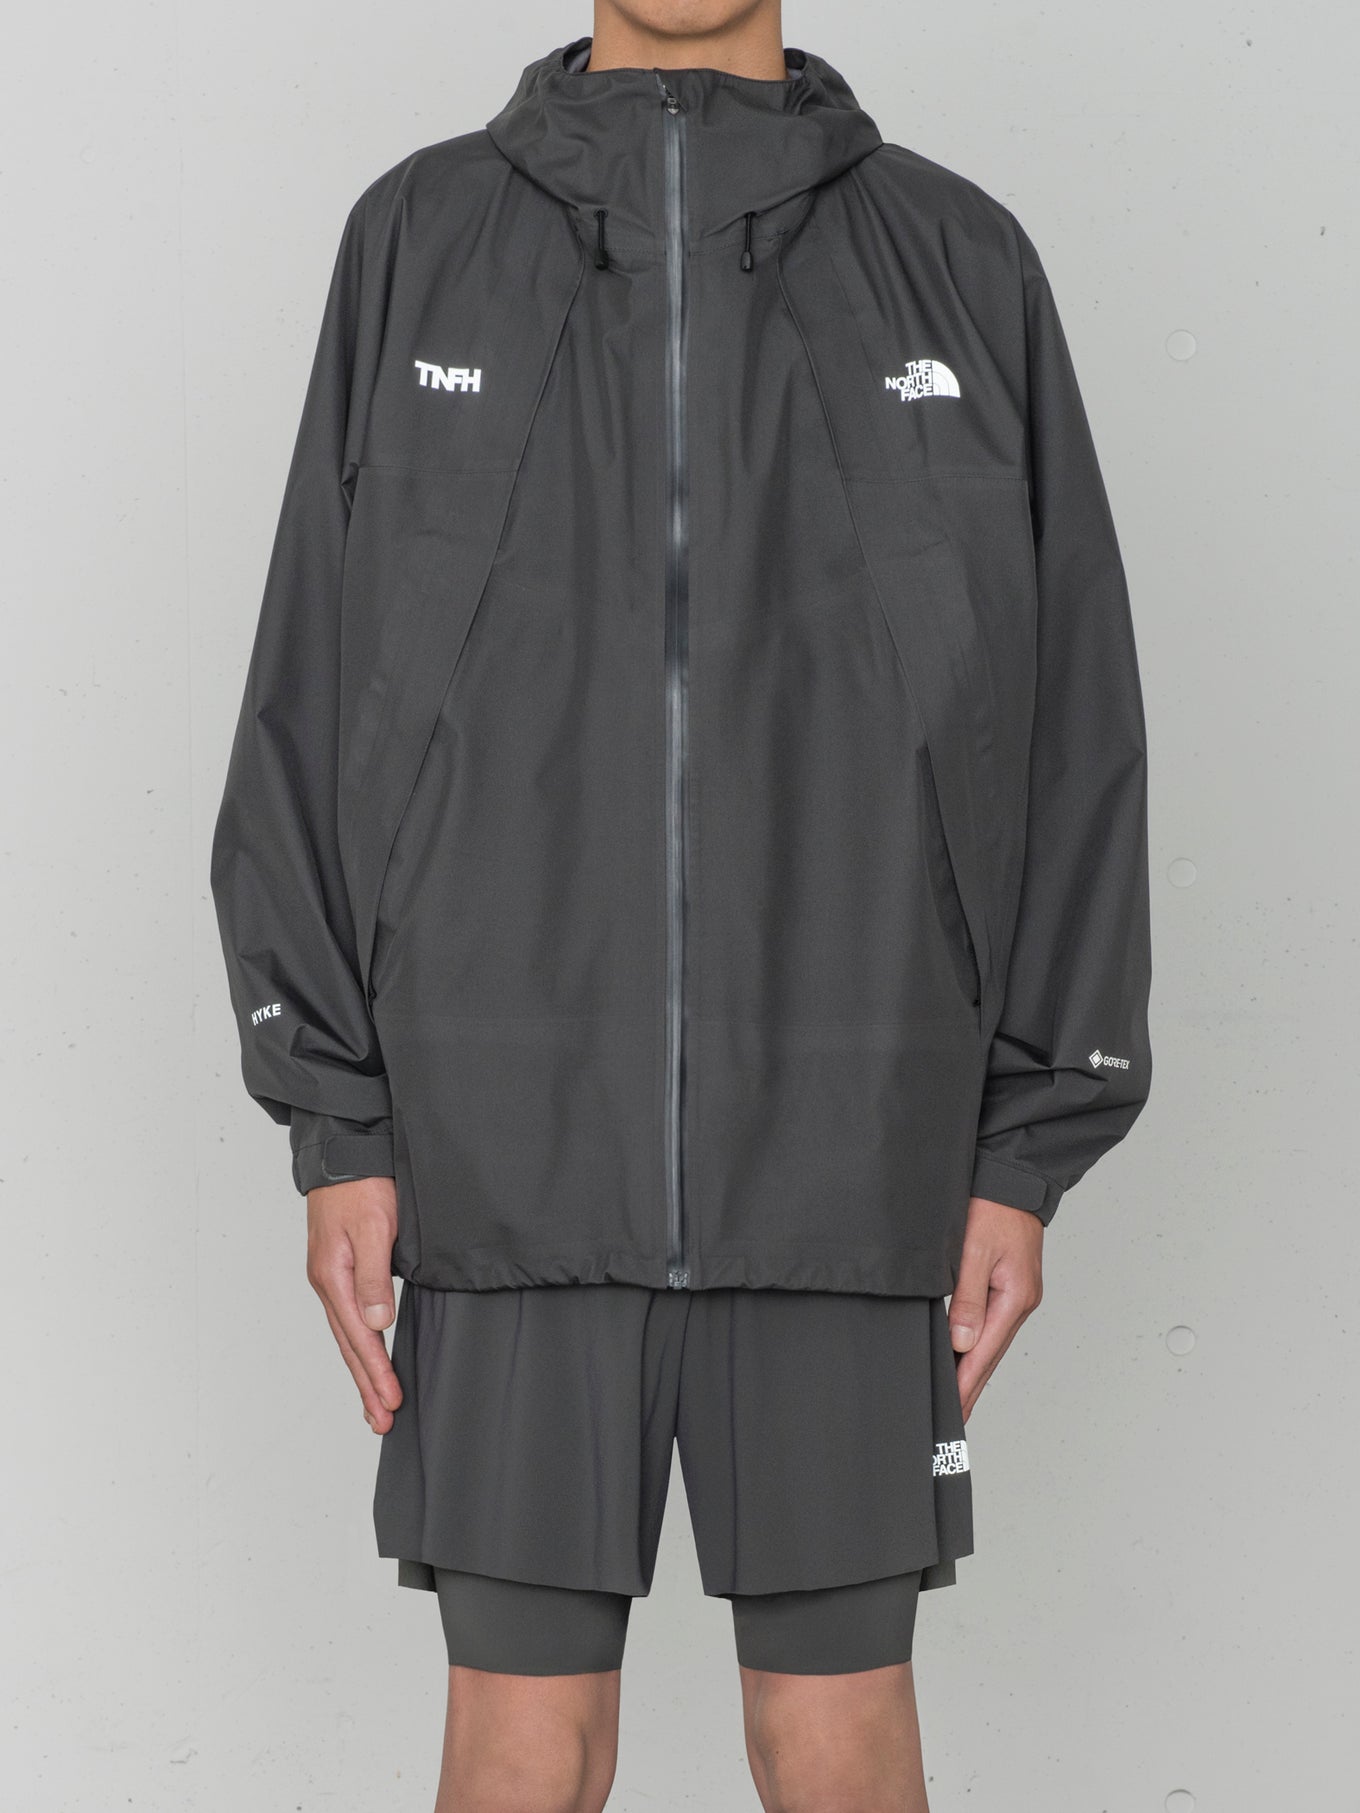 GTX Trail Jacket (Mens)TNFH THE NORTH FACE × HYKE – HYKE ONLINE STORE